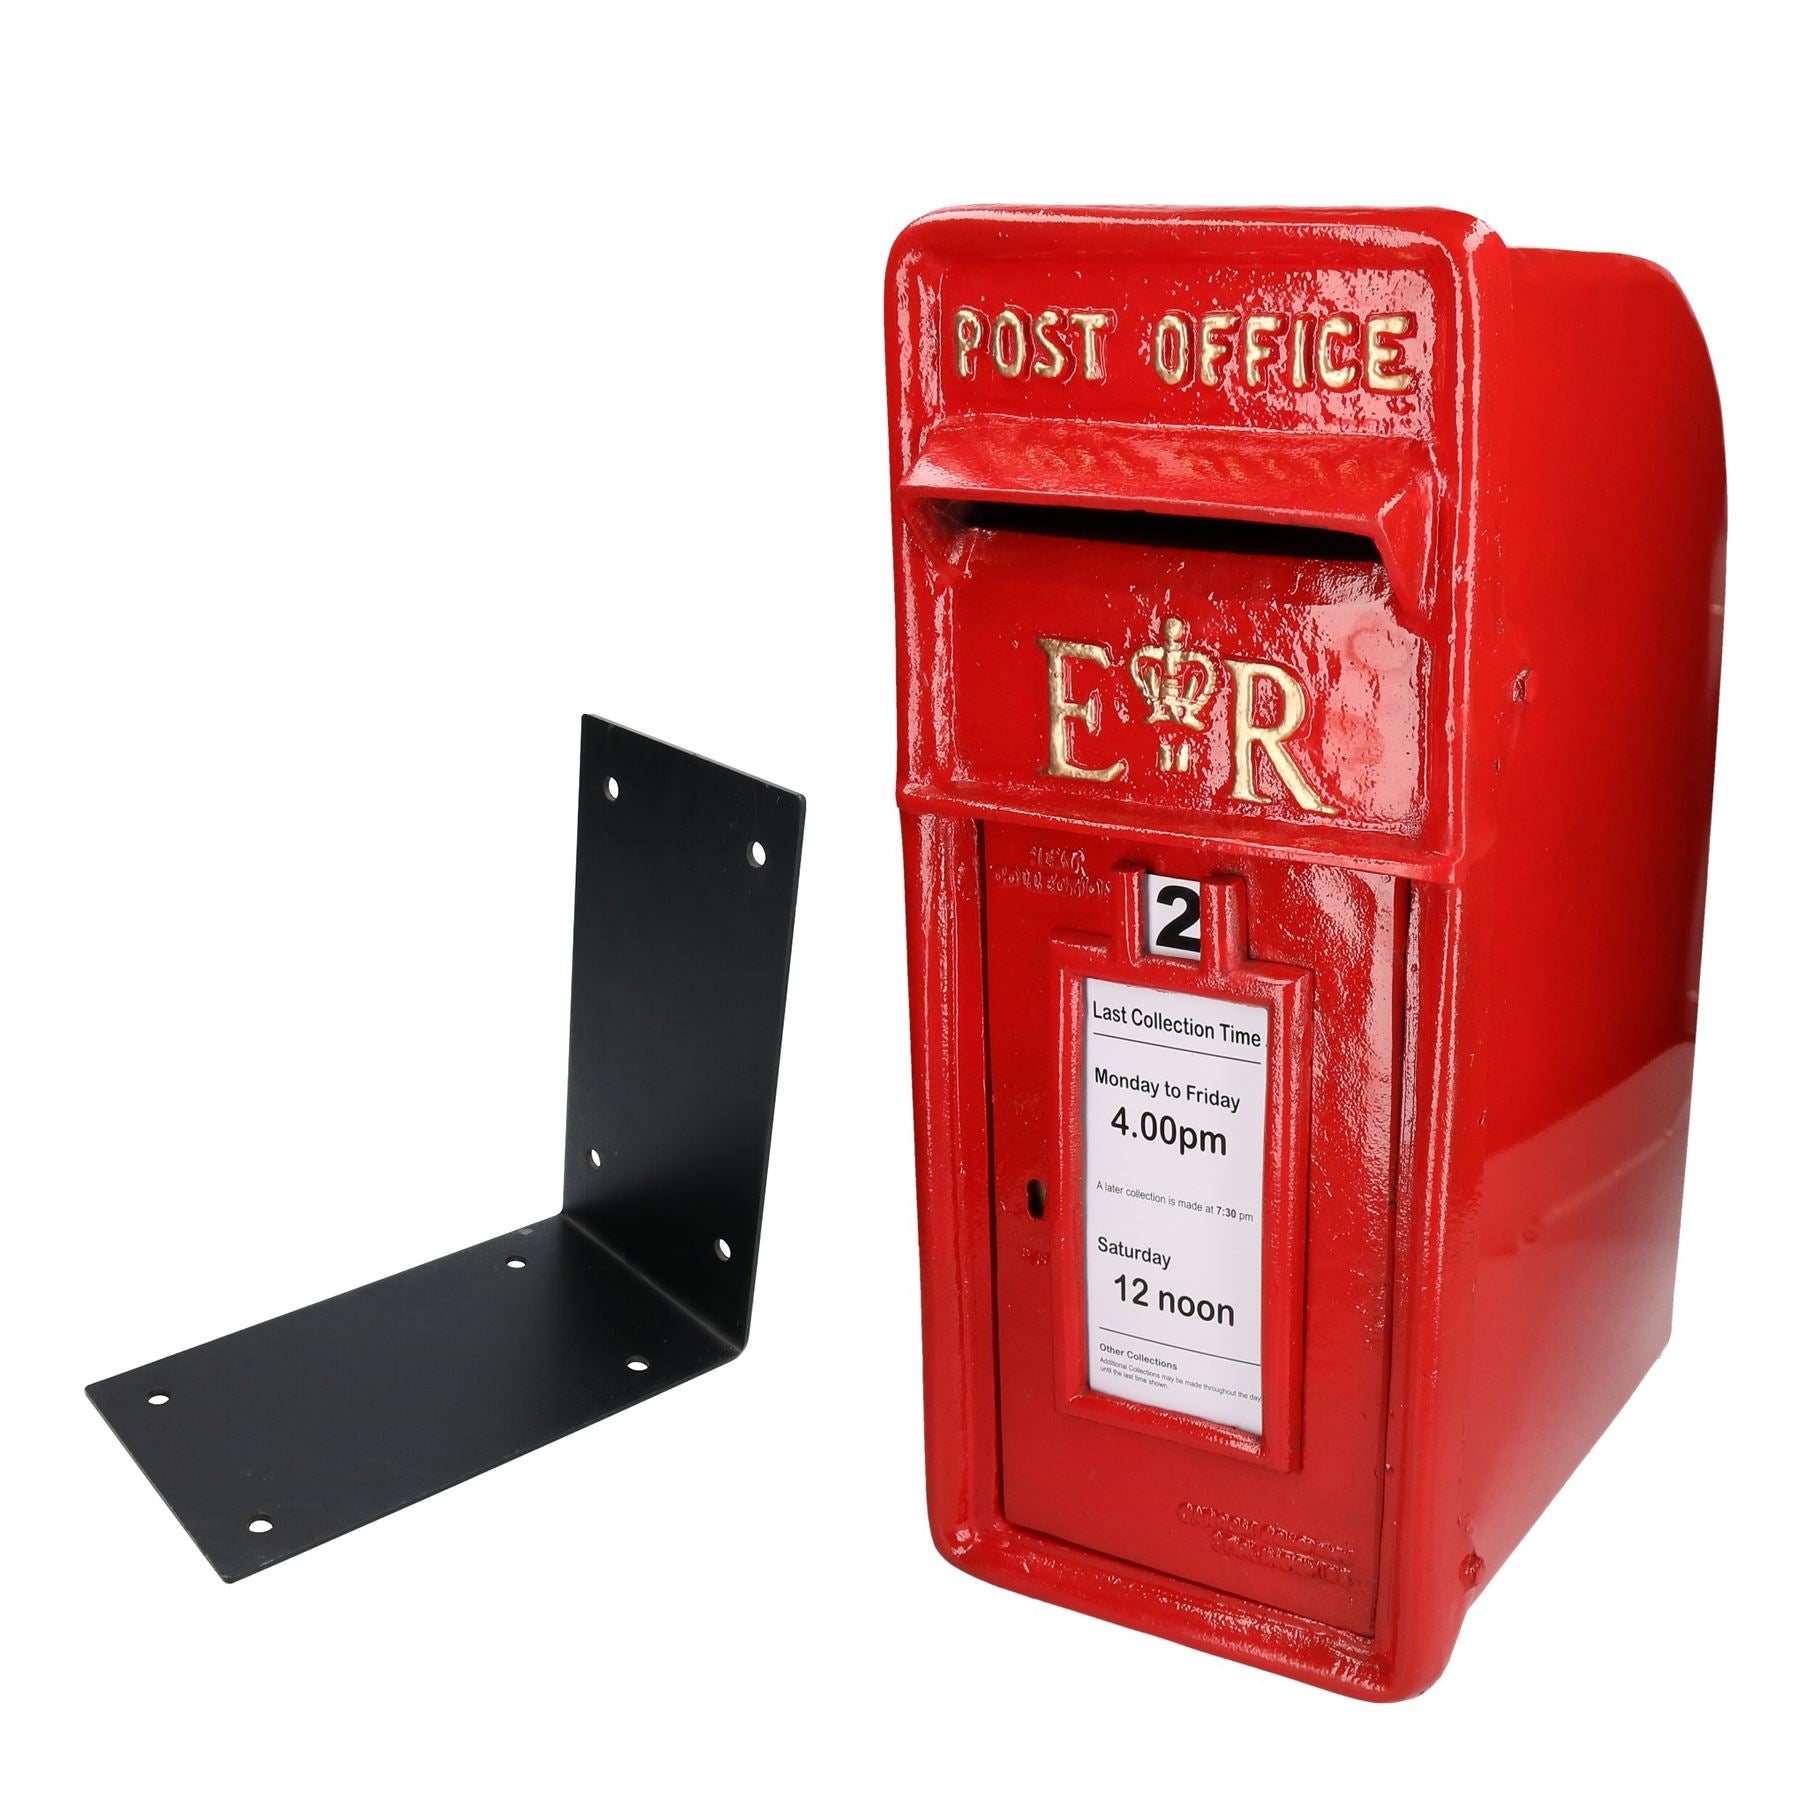 ER Royal Mail Post Mail Letter Box Replica Cast Iron Red Post Office & Wall Mount